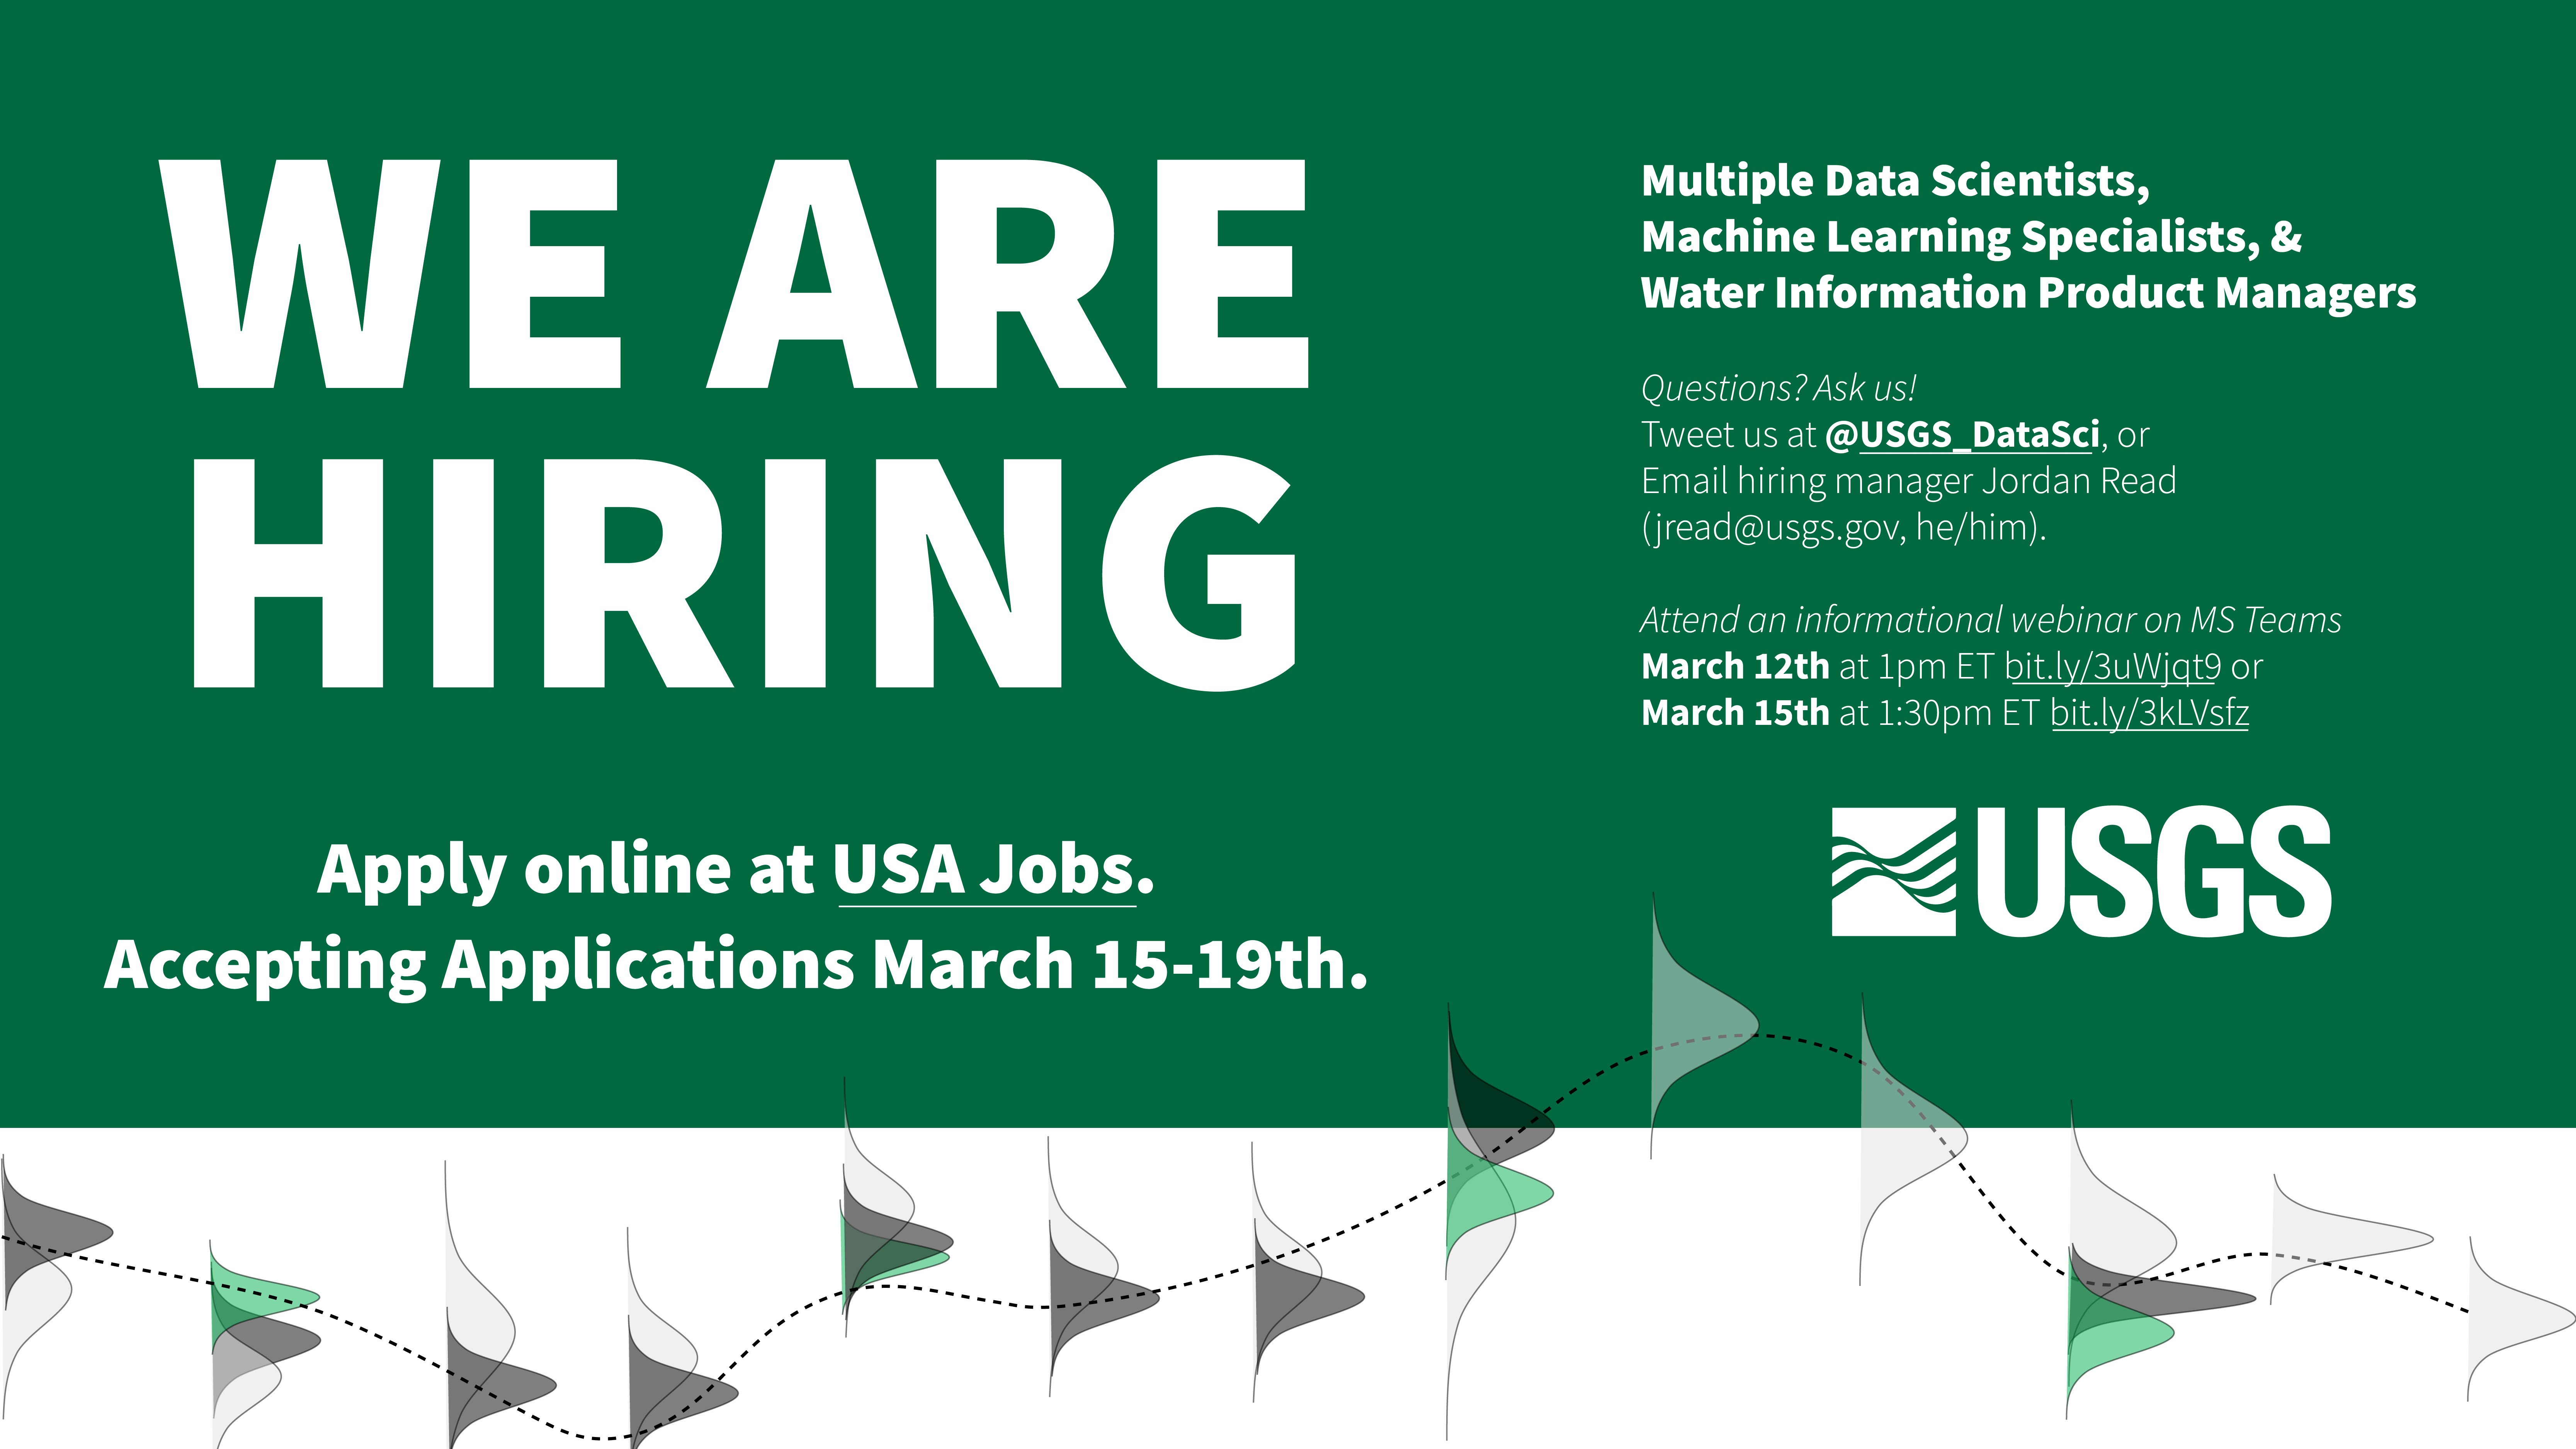 hiring flier image which contains a graphic of data assimilation modeled and observed data uncertainty distributions as well as large text 'We are hiring' and additional details about the job openings, all of which are included in the text below. In brief, there are multiple positions for machine learning specialists, data scientists, and water information product managers. Email jread@usgs.gov with question and/or attend informational Session 1: March 12th at 1pm EST on MS Teams. Join at: http://bit.ly/3uWjqt9 or informational Session 2: March 15th at 1:30pm EST on MS Teams. Join at: http://bit.ly/3kLVsfz. Image credit E Bechtel